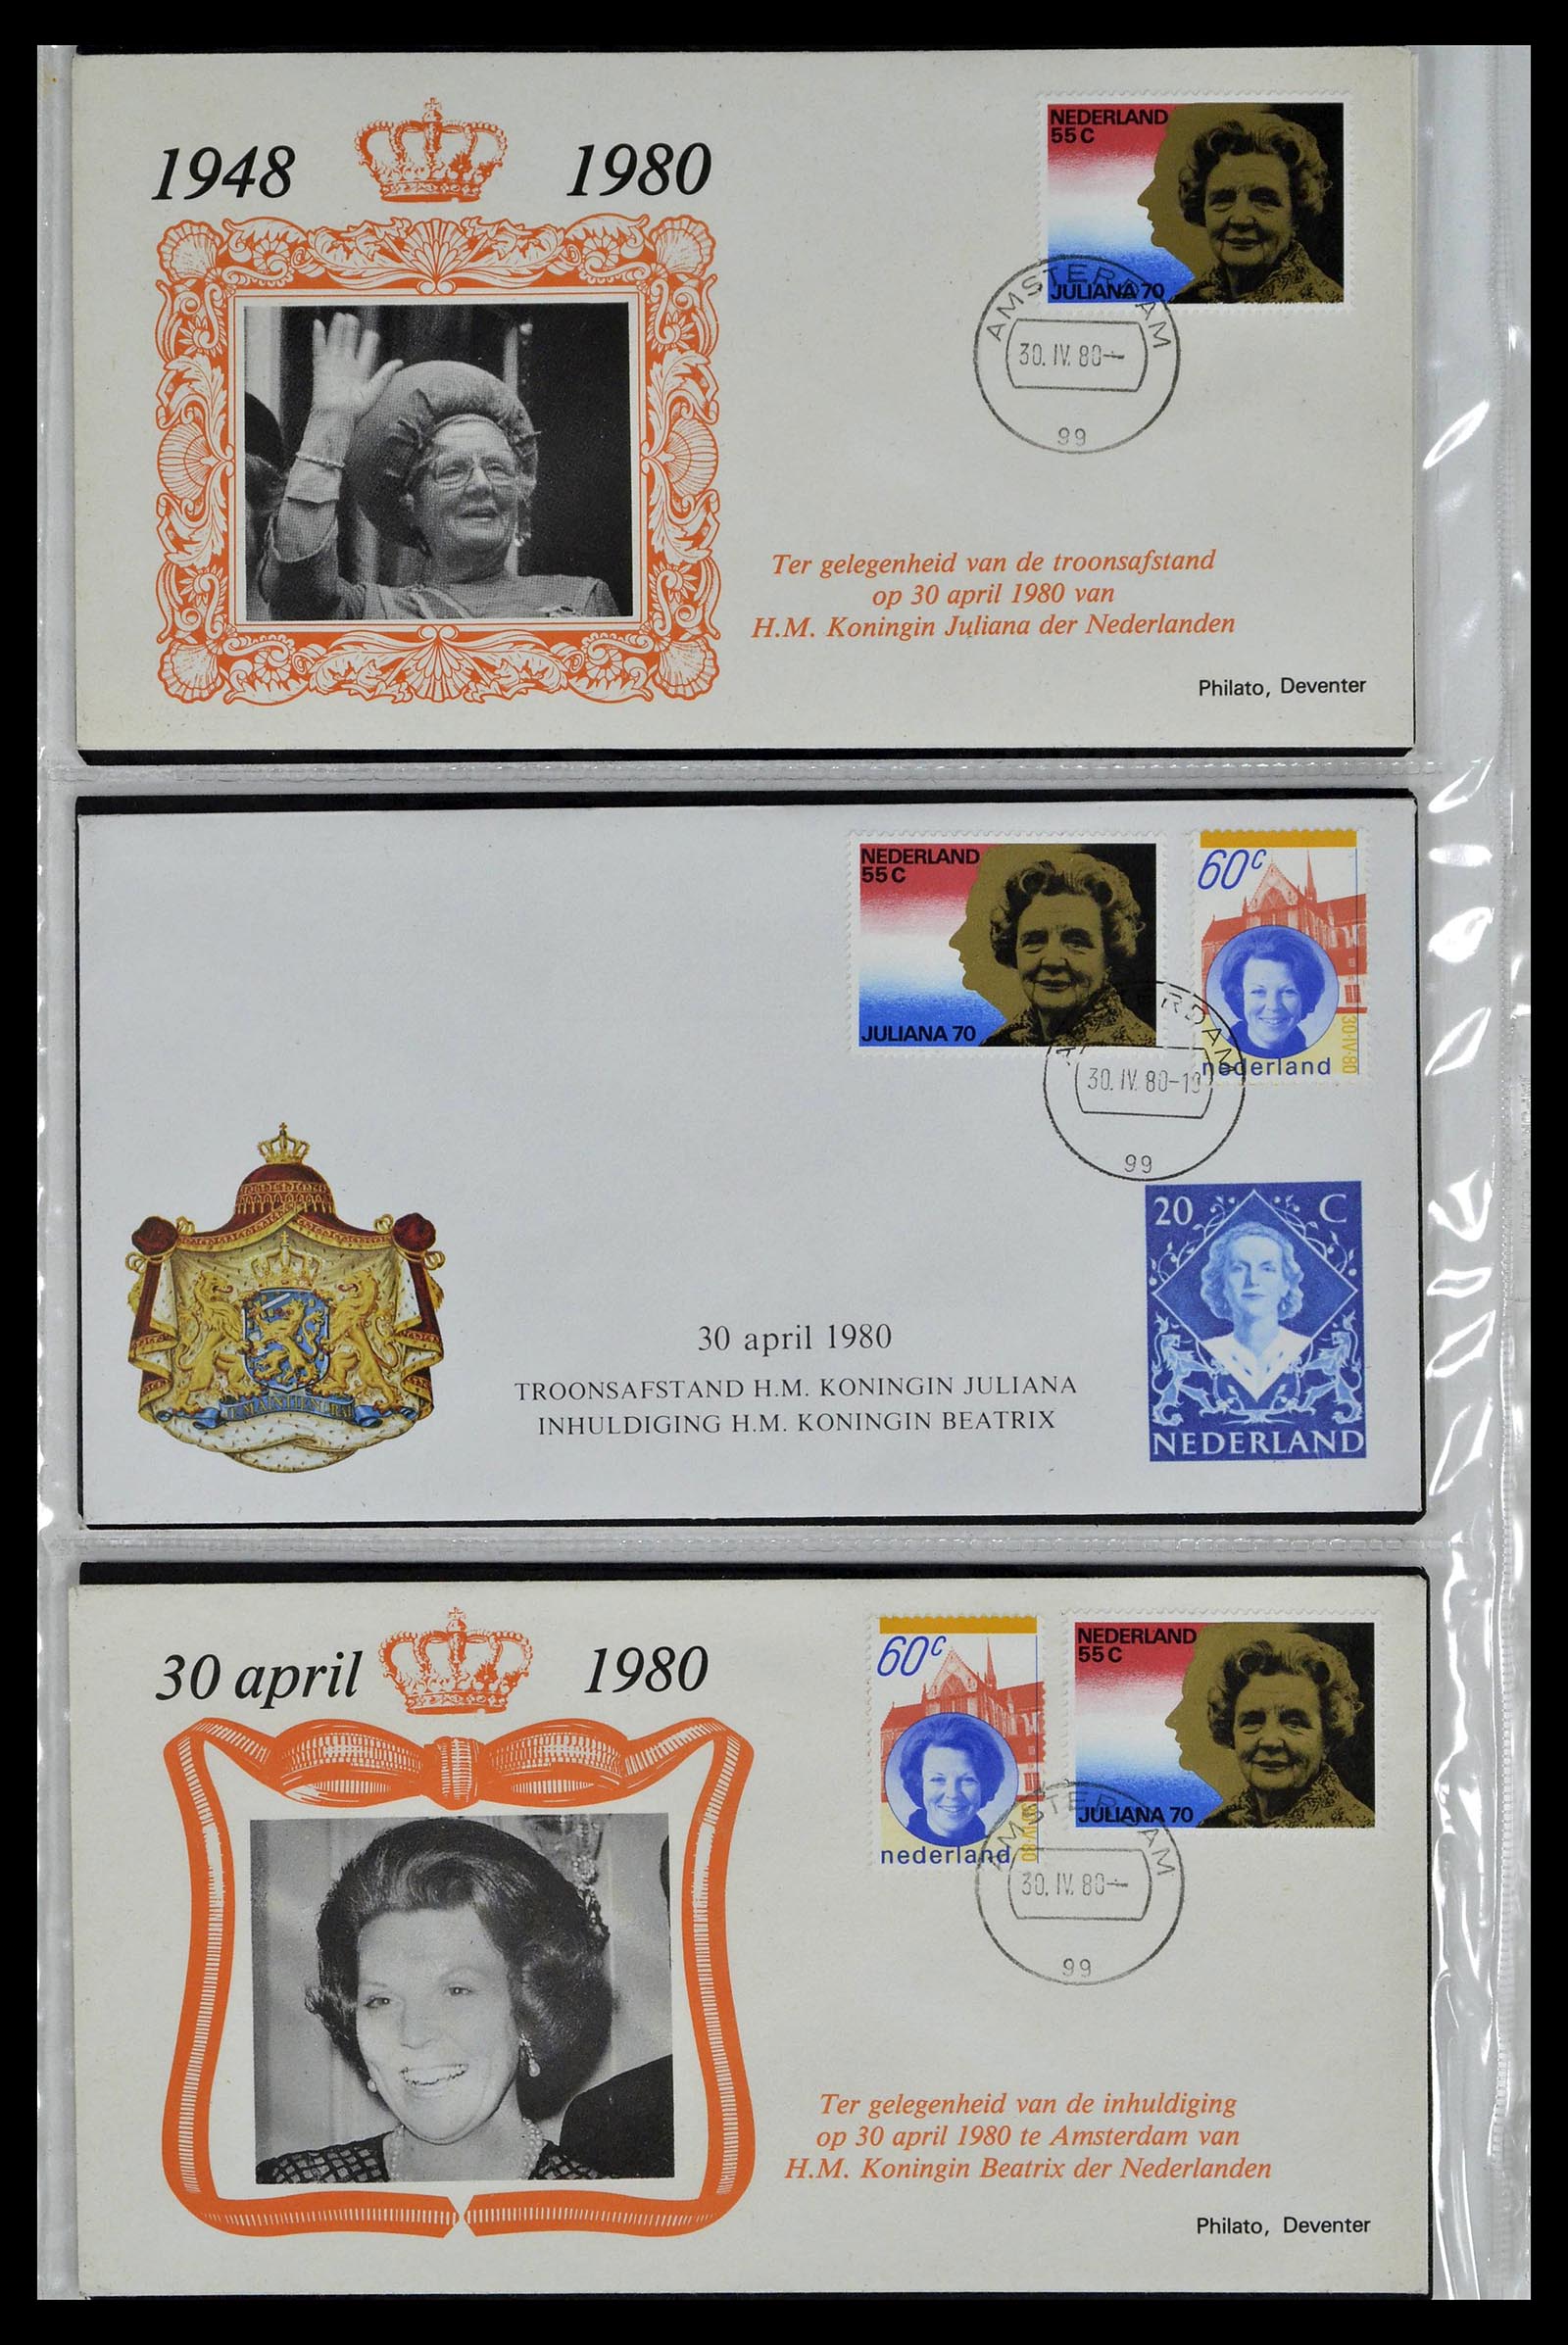 38559 0502 - Stamp collection 38559 Netherlands special first day covers.